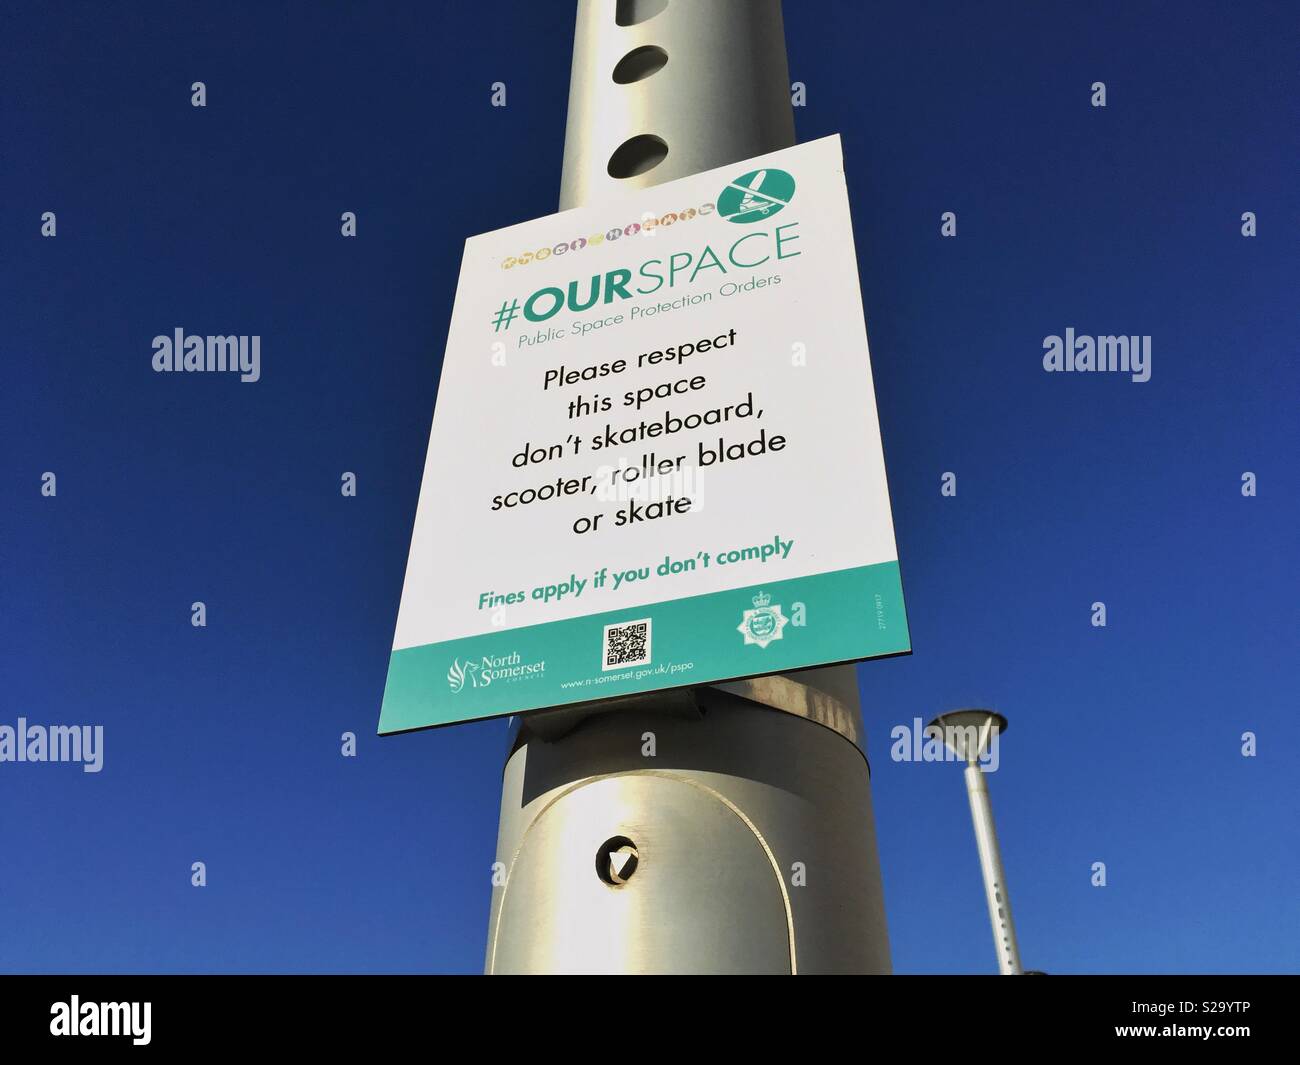 A sign giving details of activities which are banned due to Public Space Protection Orders in Weston-super-Mare, UK Stock Photo